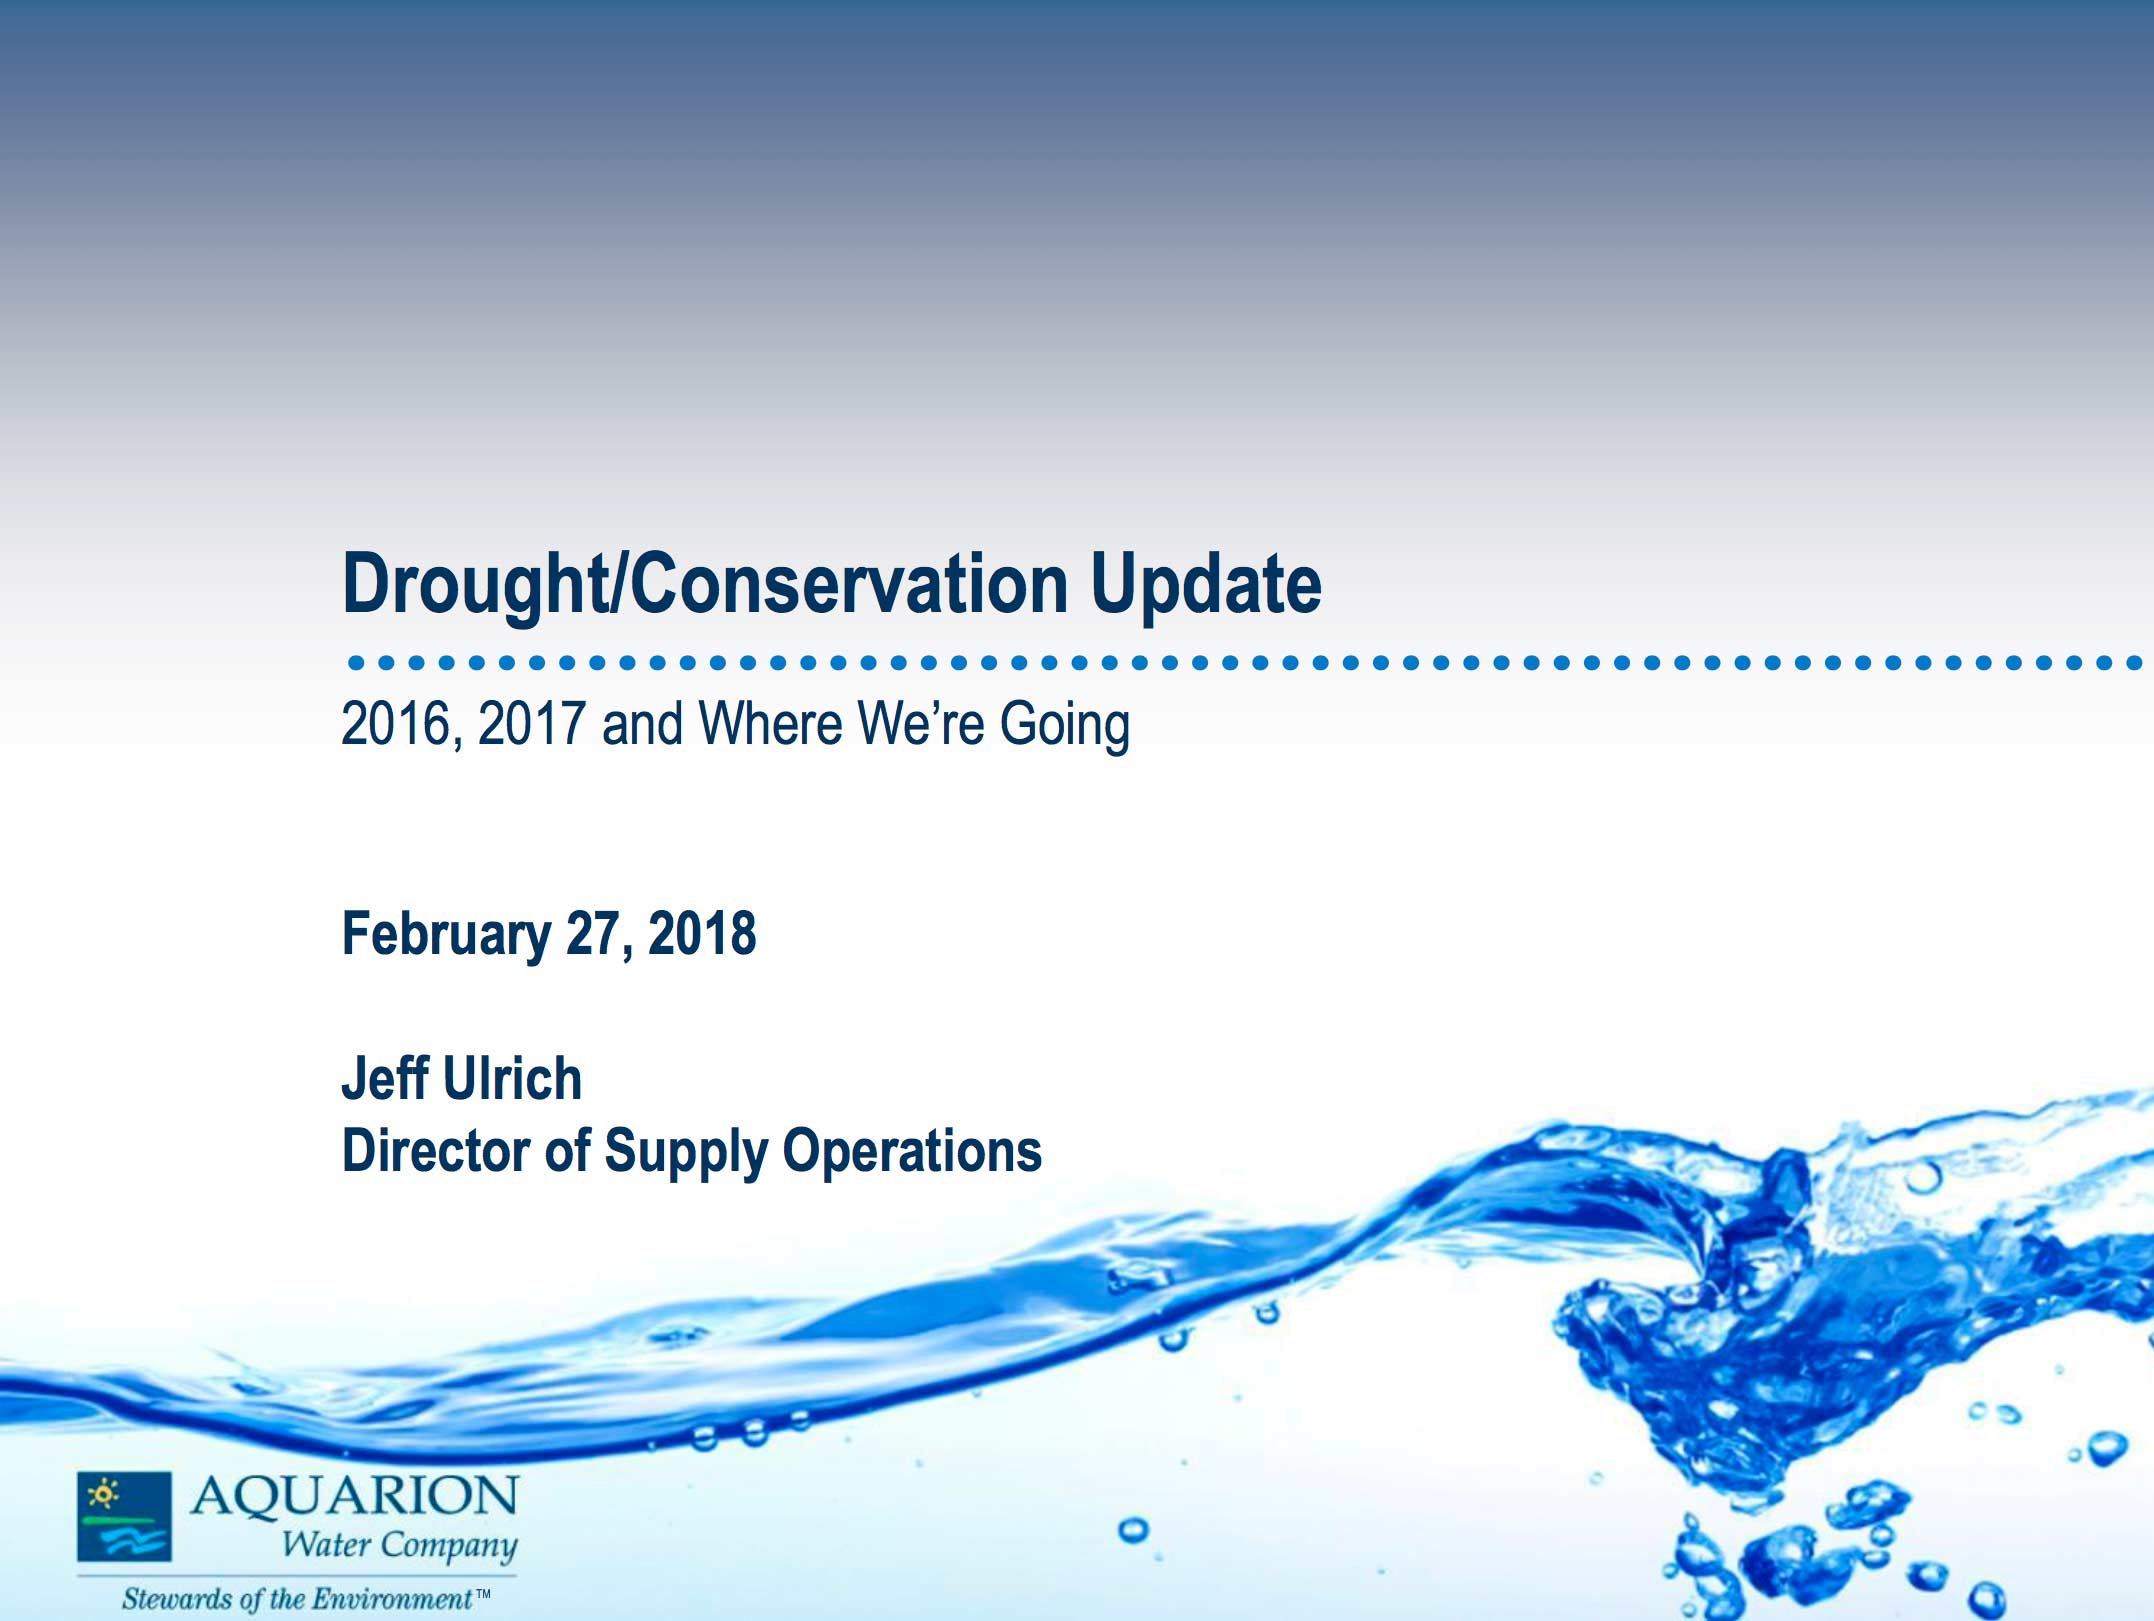 Drought Conservation Update: Presentation given  by Jeff Ulrich, Director of Supply Operations for Aquarion Water Company on February 27, 2018